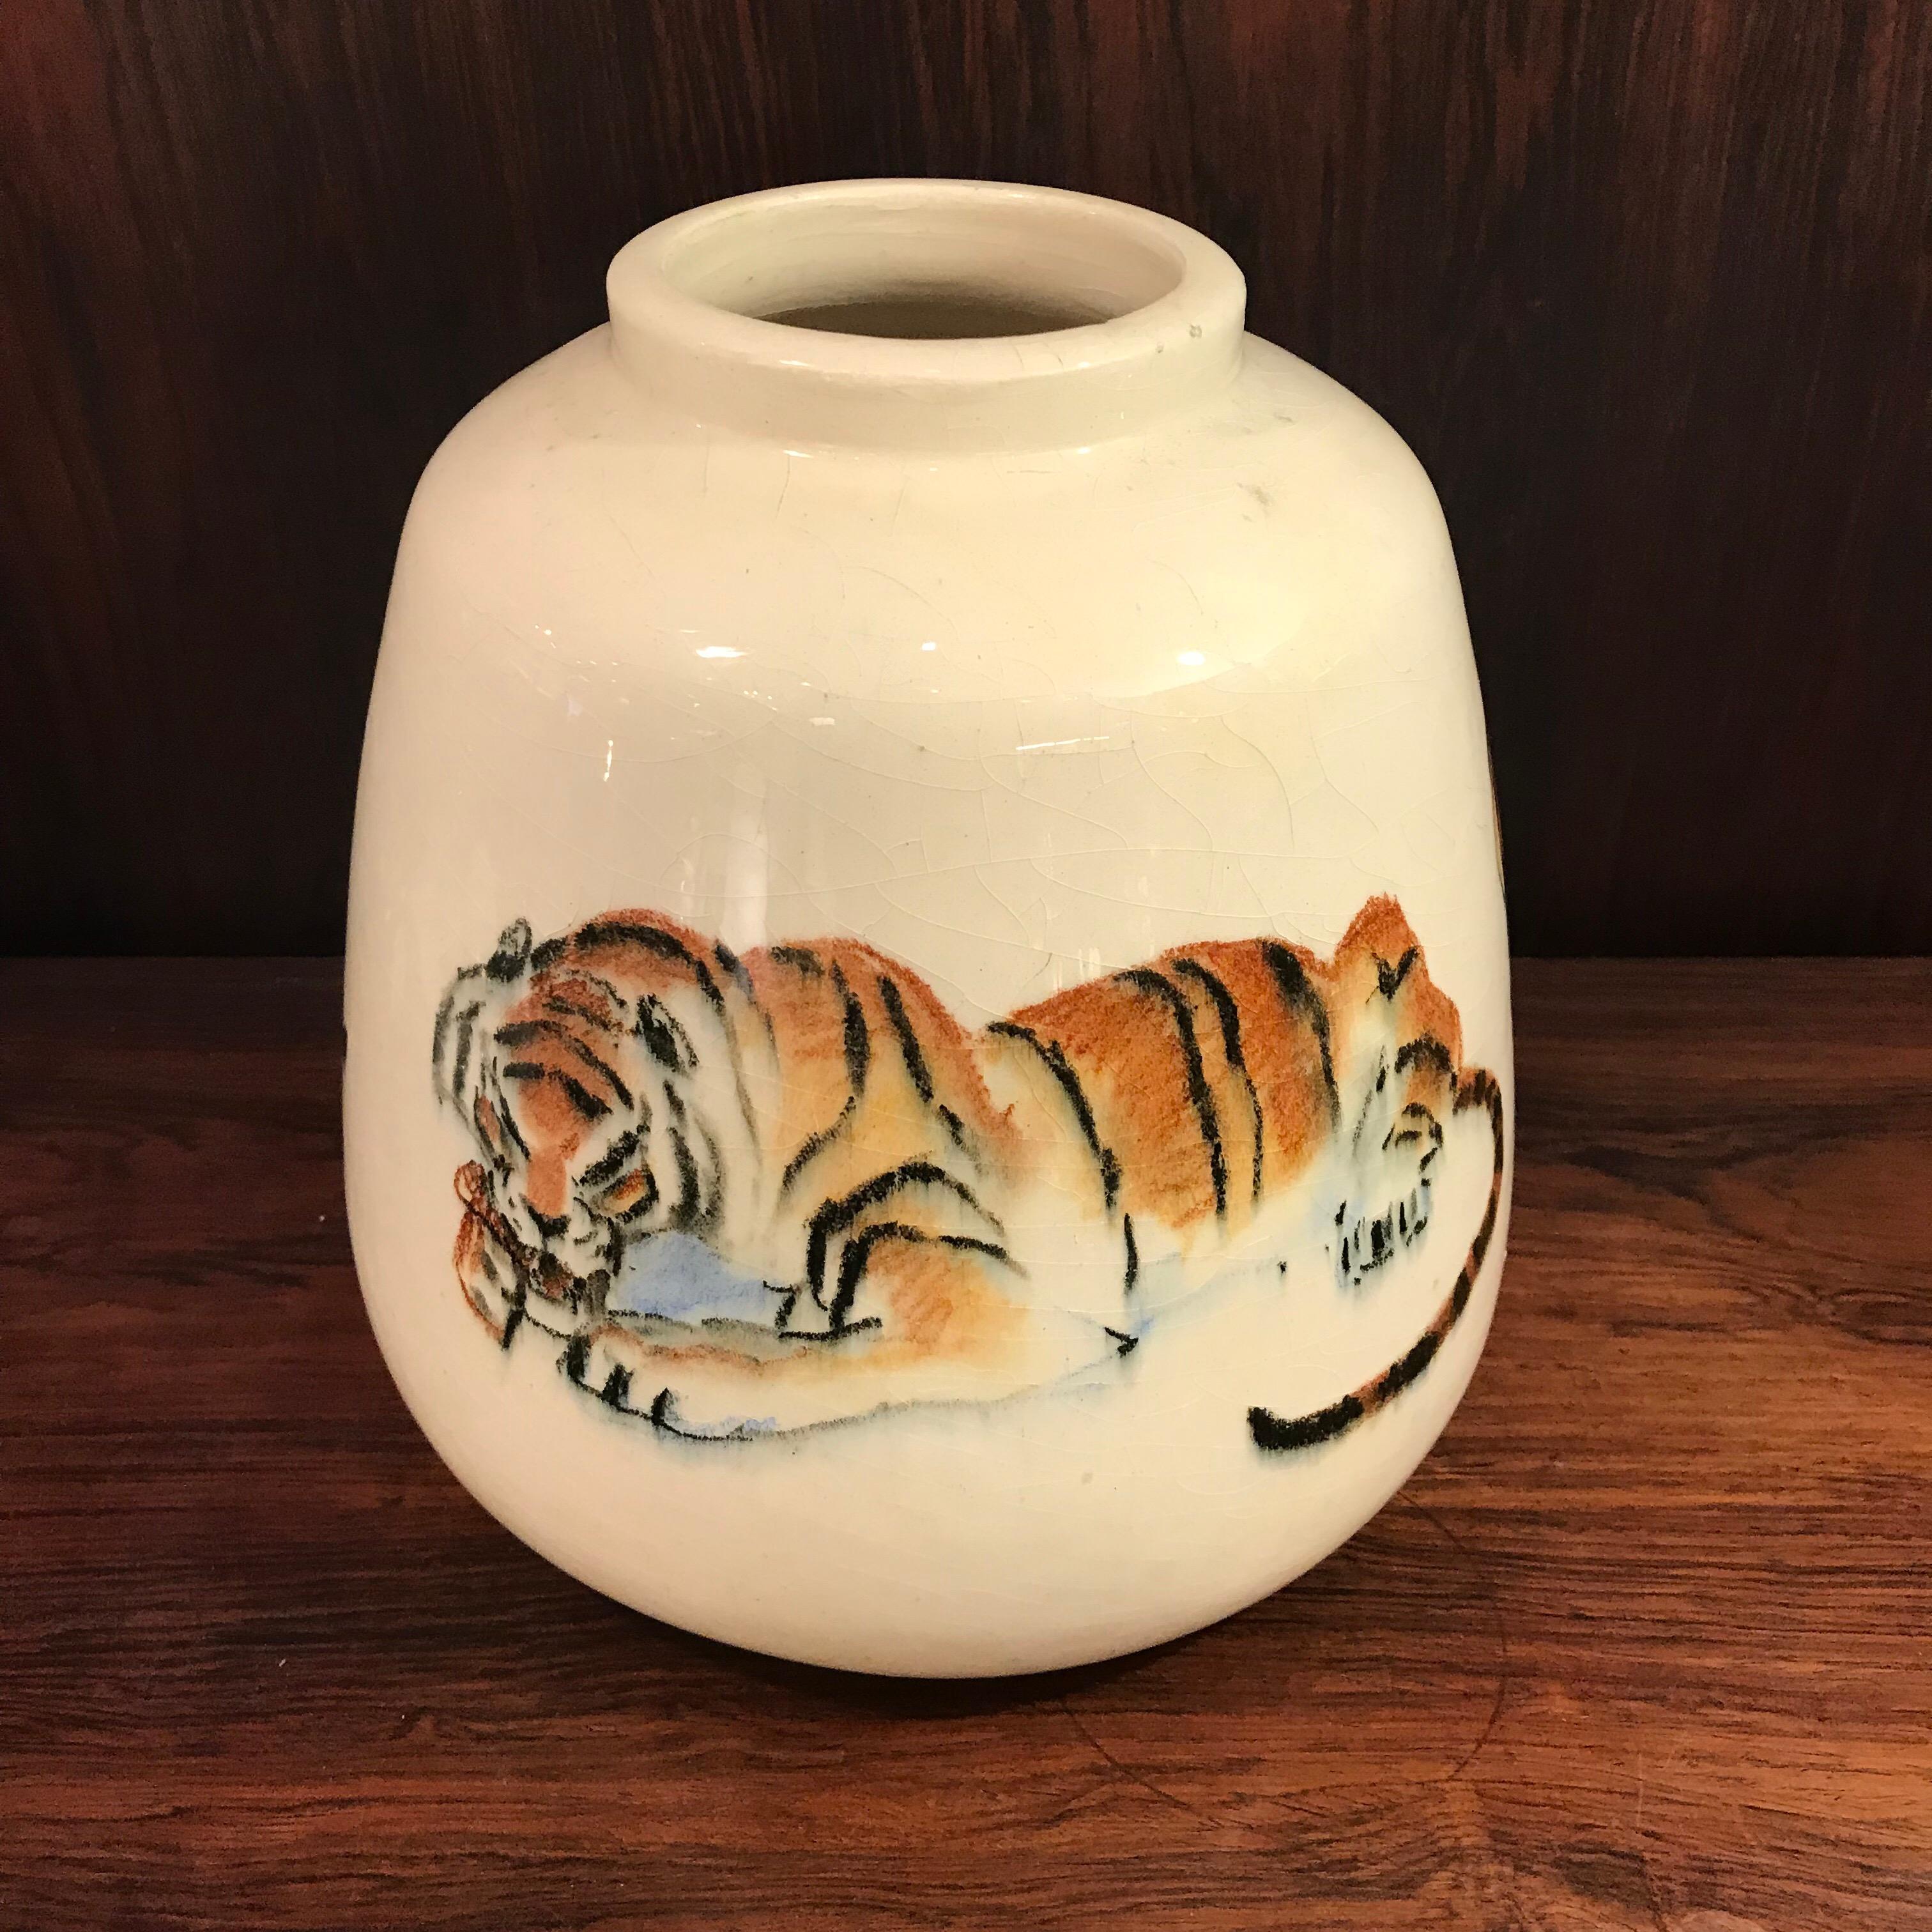 Very rare - one-off - French 1930s “Tiger“ Vase by Raoul Lachenal, signed 